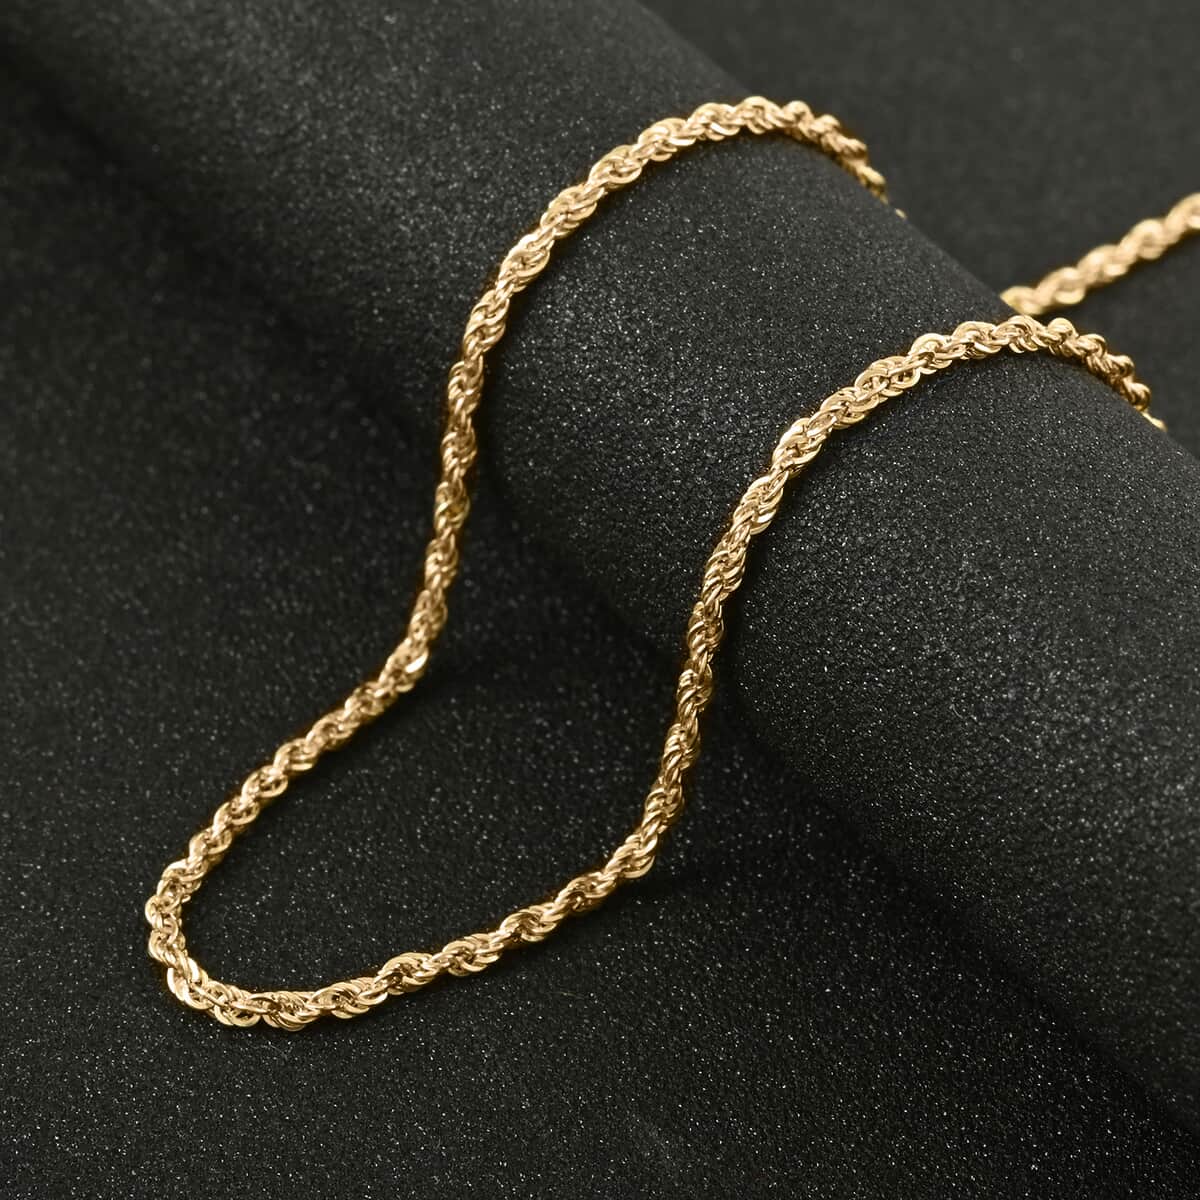 Buy 10K Yellow Gold 5mm Rope Chain Necklace 24 Inches 9.40 Grams at ShopLC.